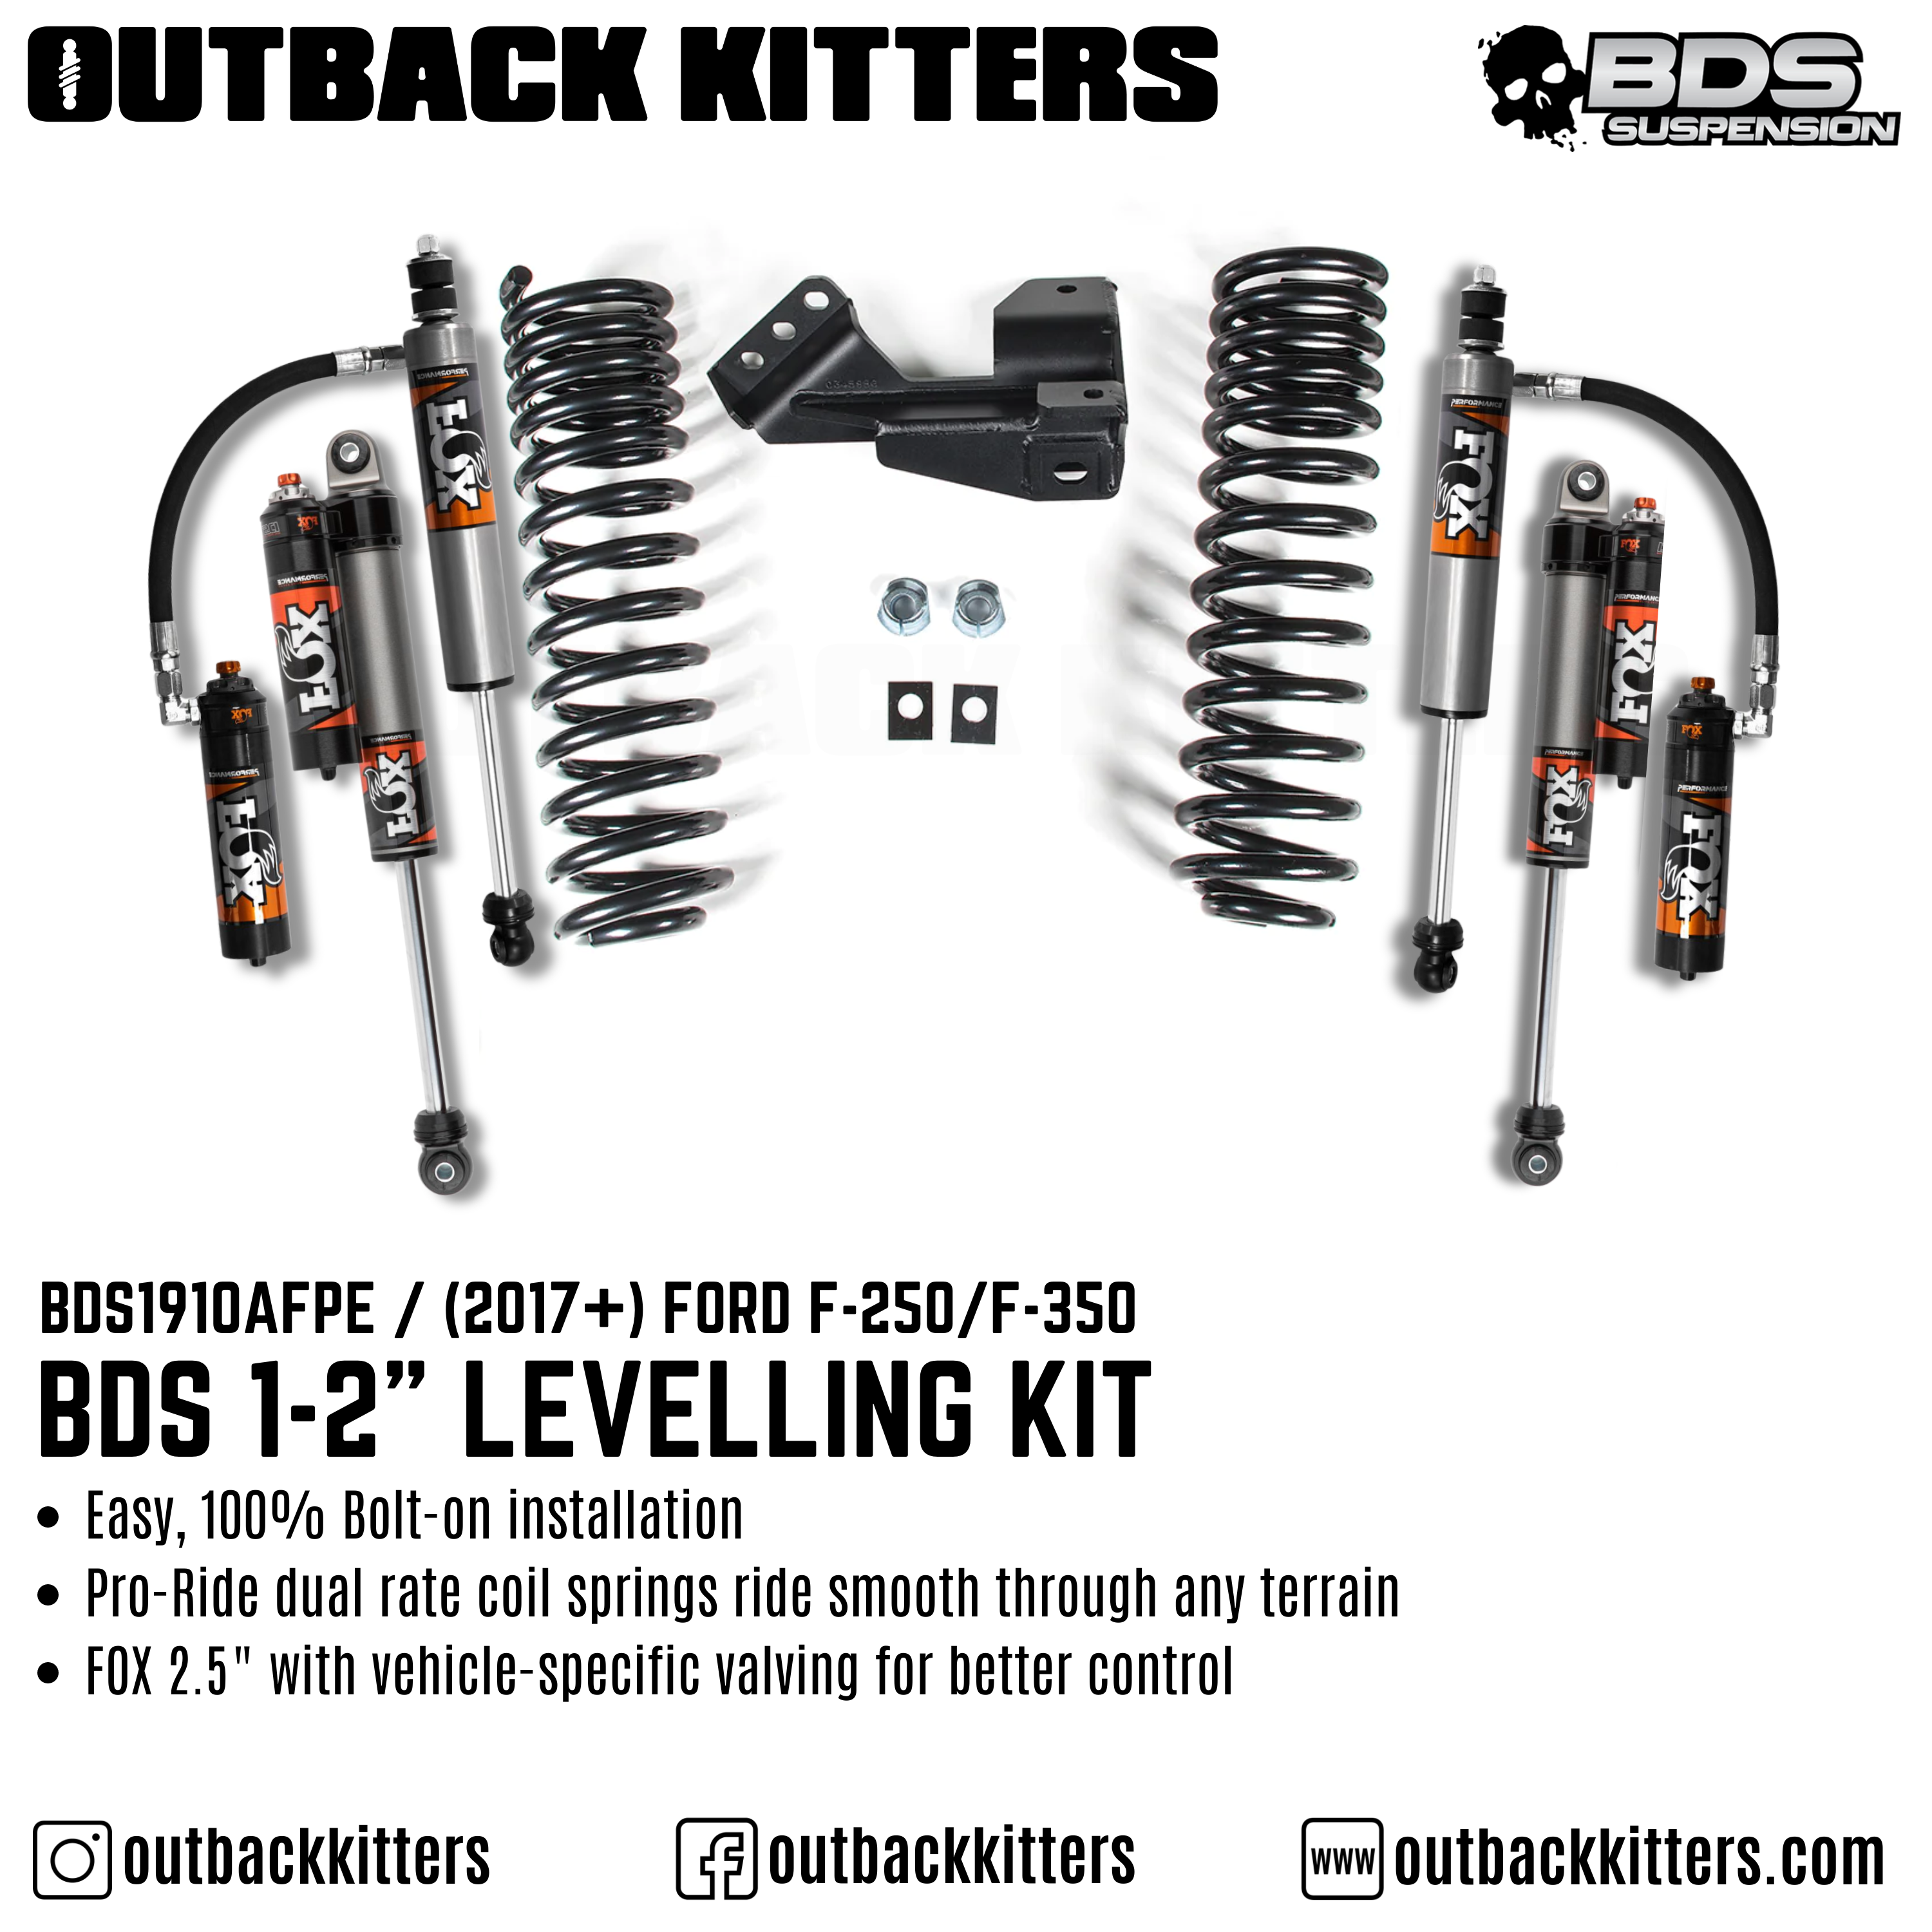 BDS Suspension 1-2" Leveling Kit for Ford F250/350